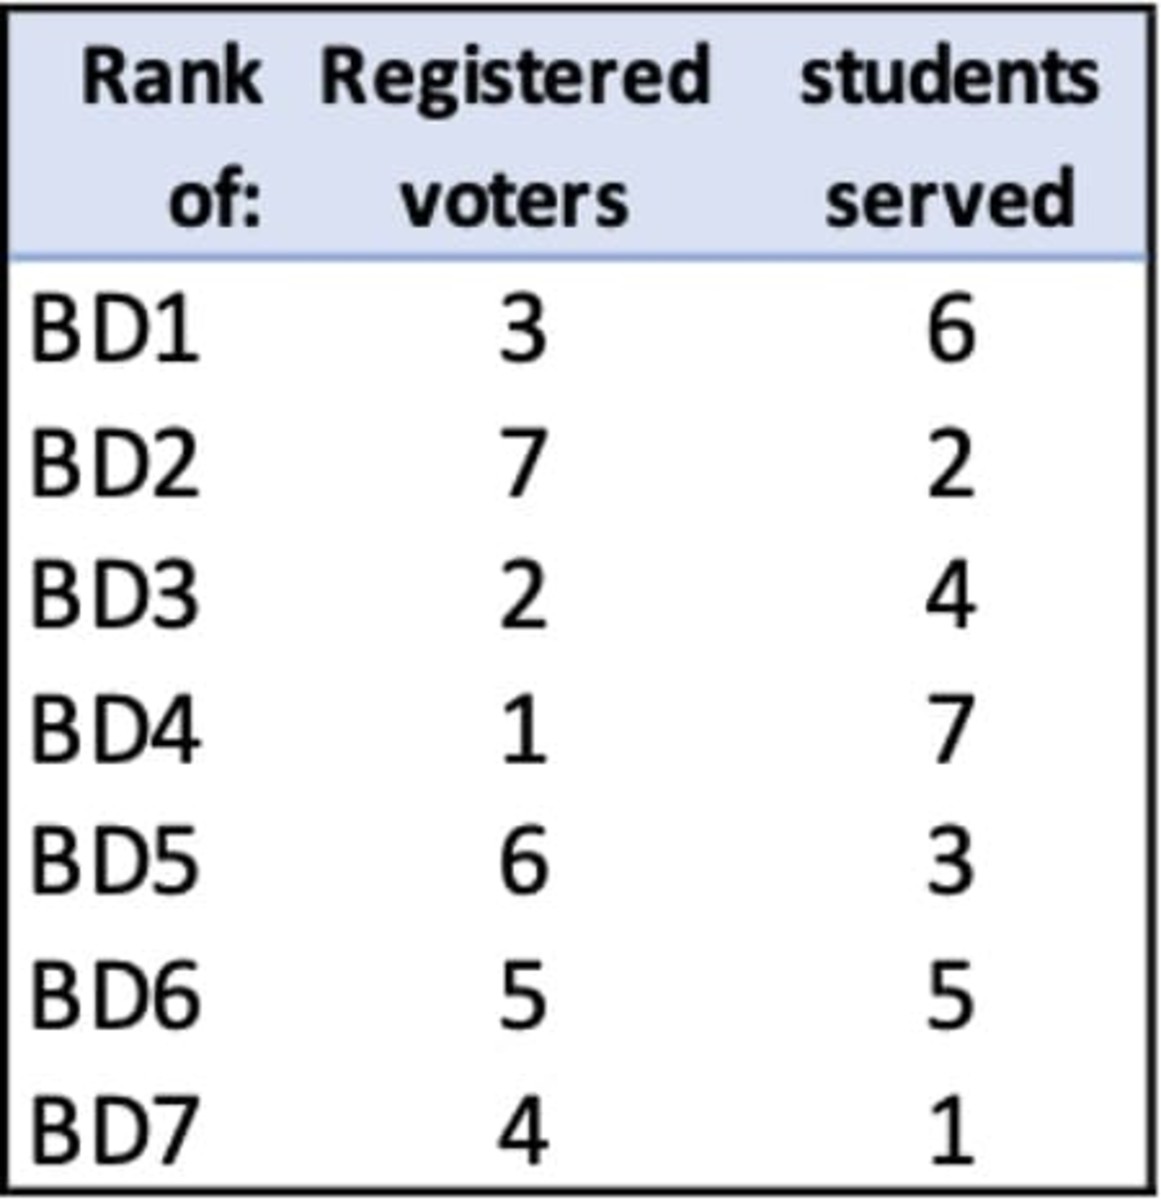 Table 3: Rank of number of students served and registered voters across LAUSD board districts. BD4 with the fewest students has the most registered voters.